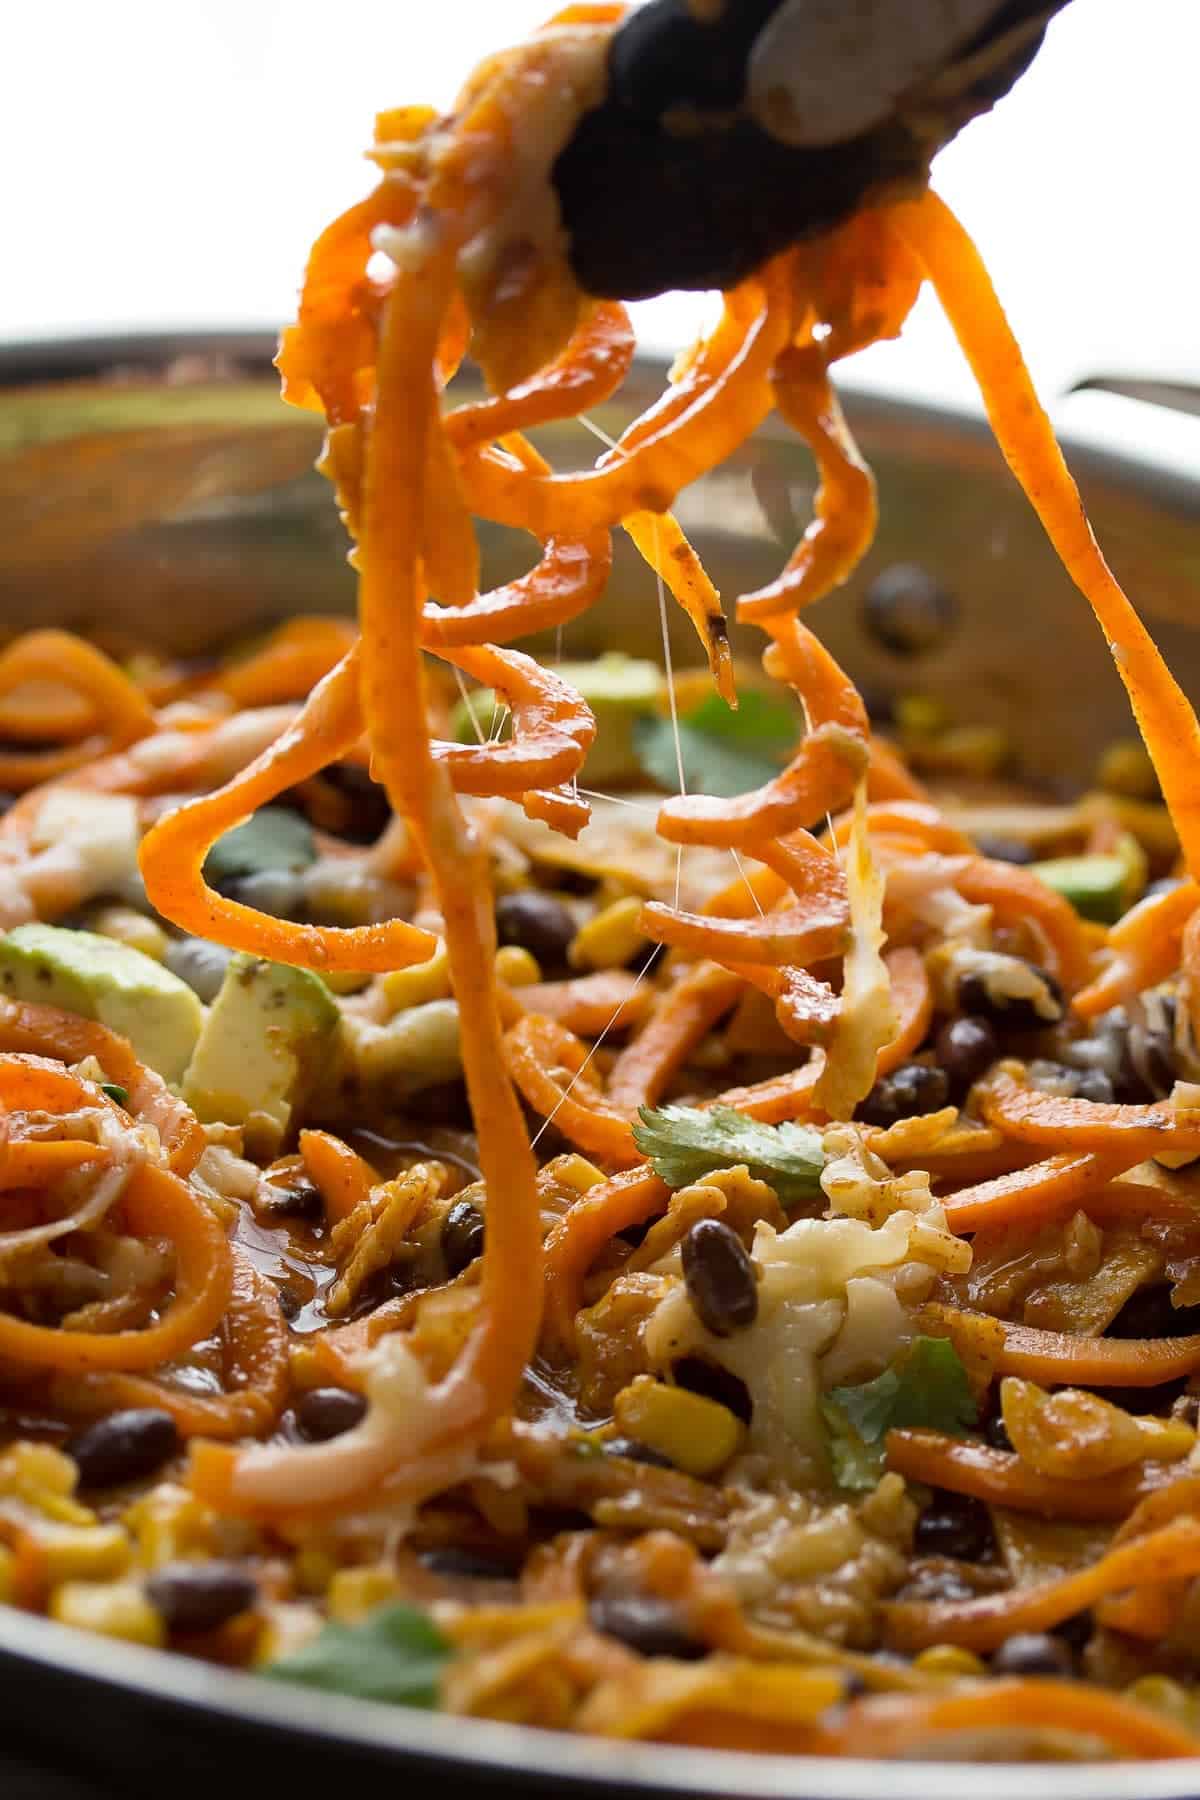 tongs lifting sweet potato noodles out of skillet